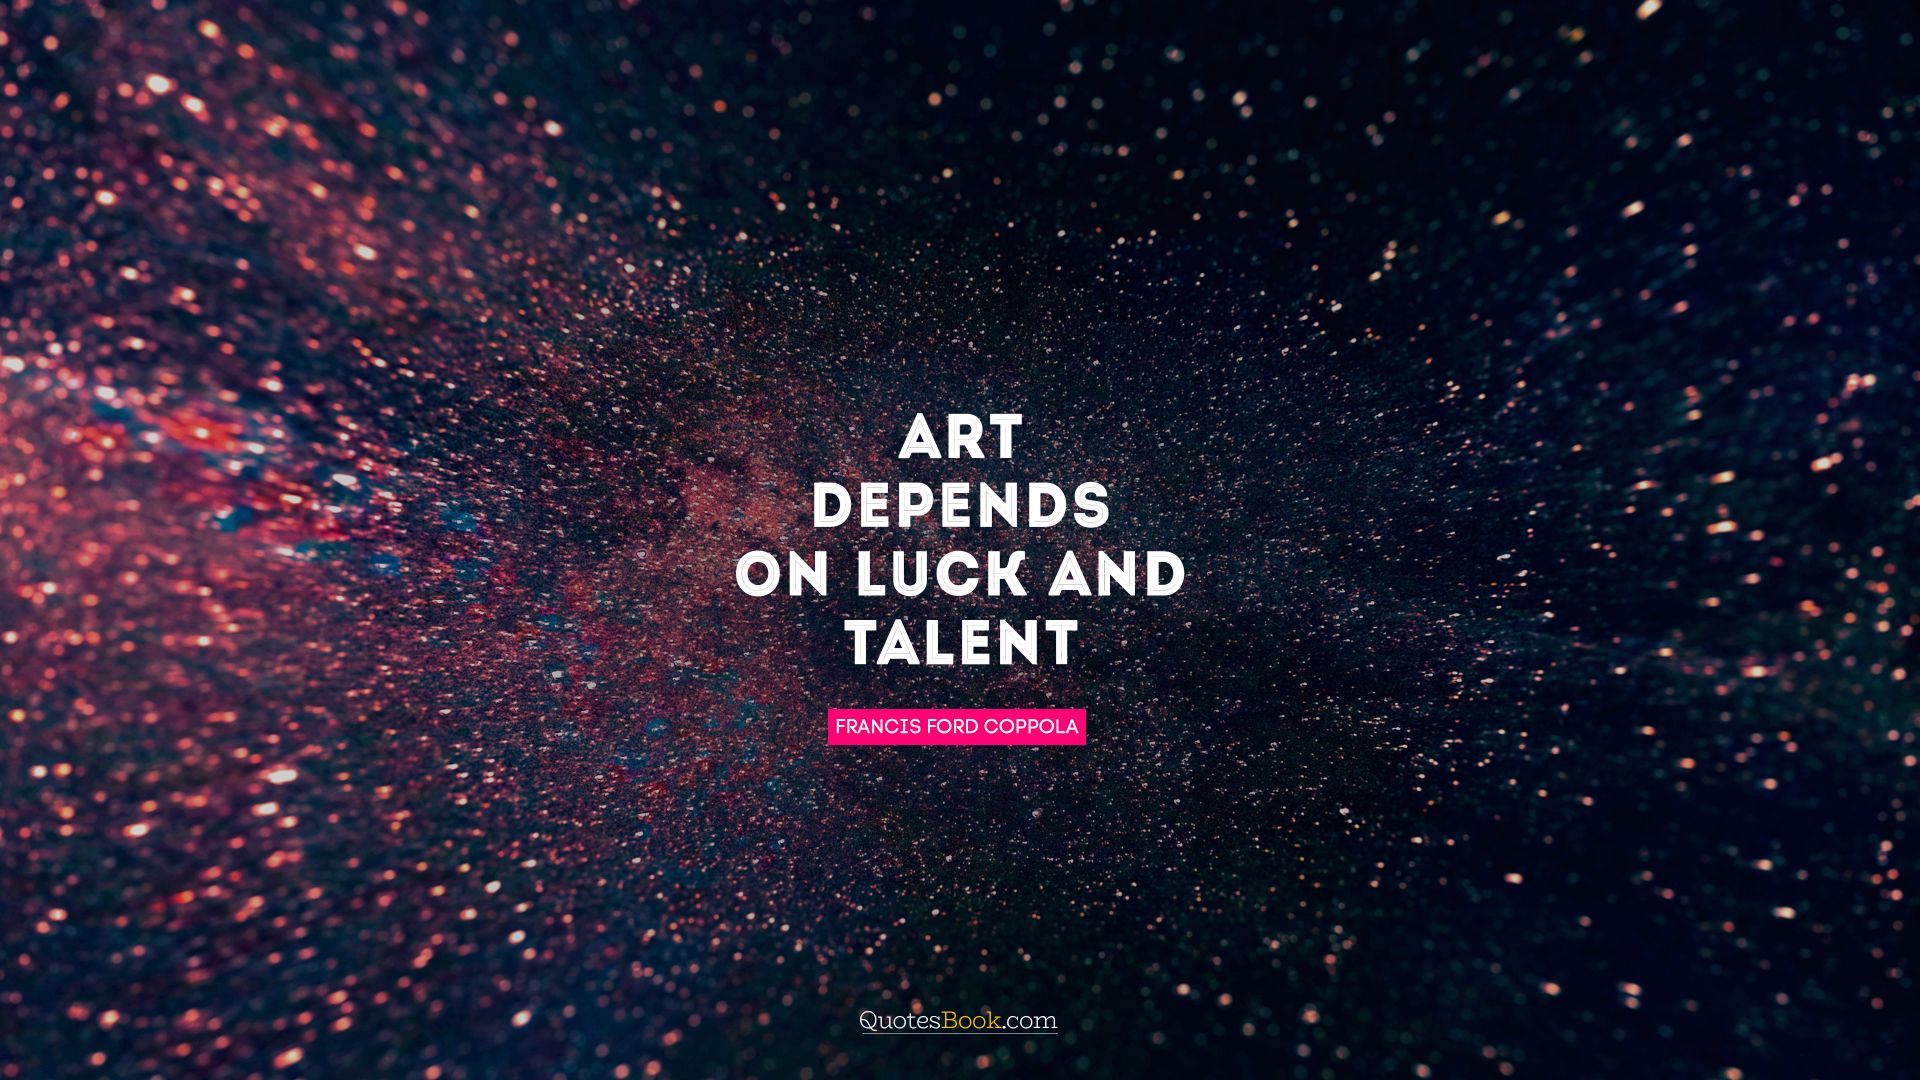 Art depends on luck and talent. - Quote by Francis Ford Coppola